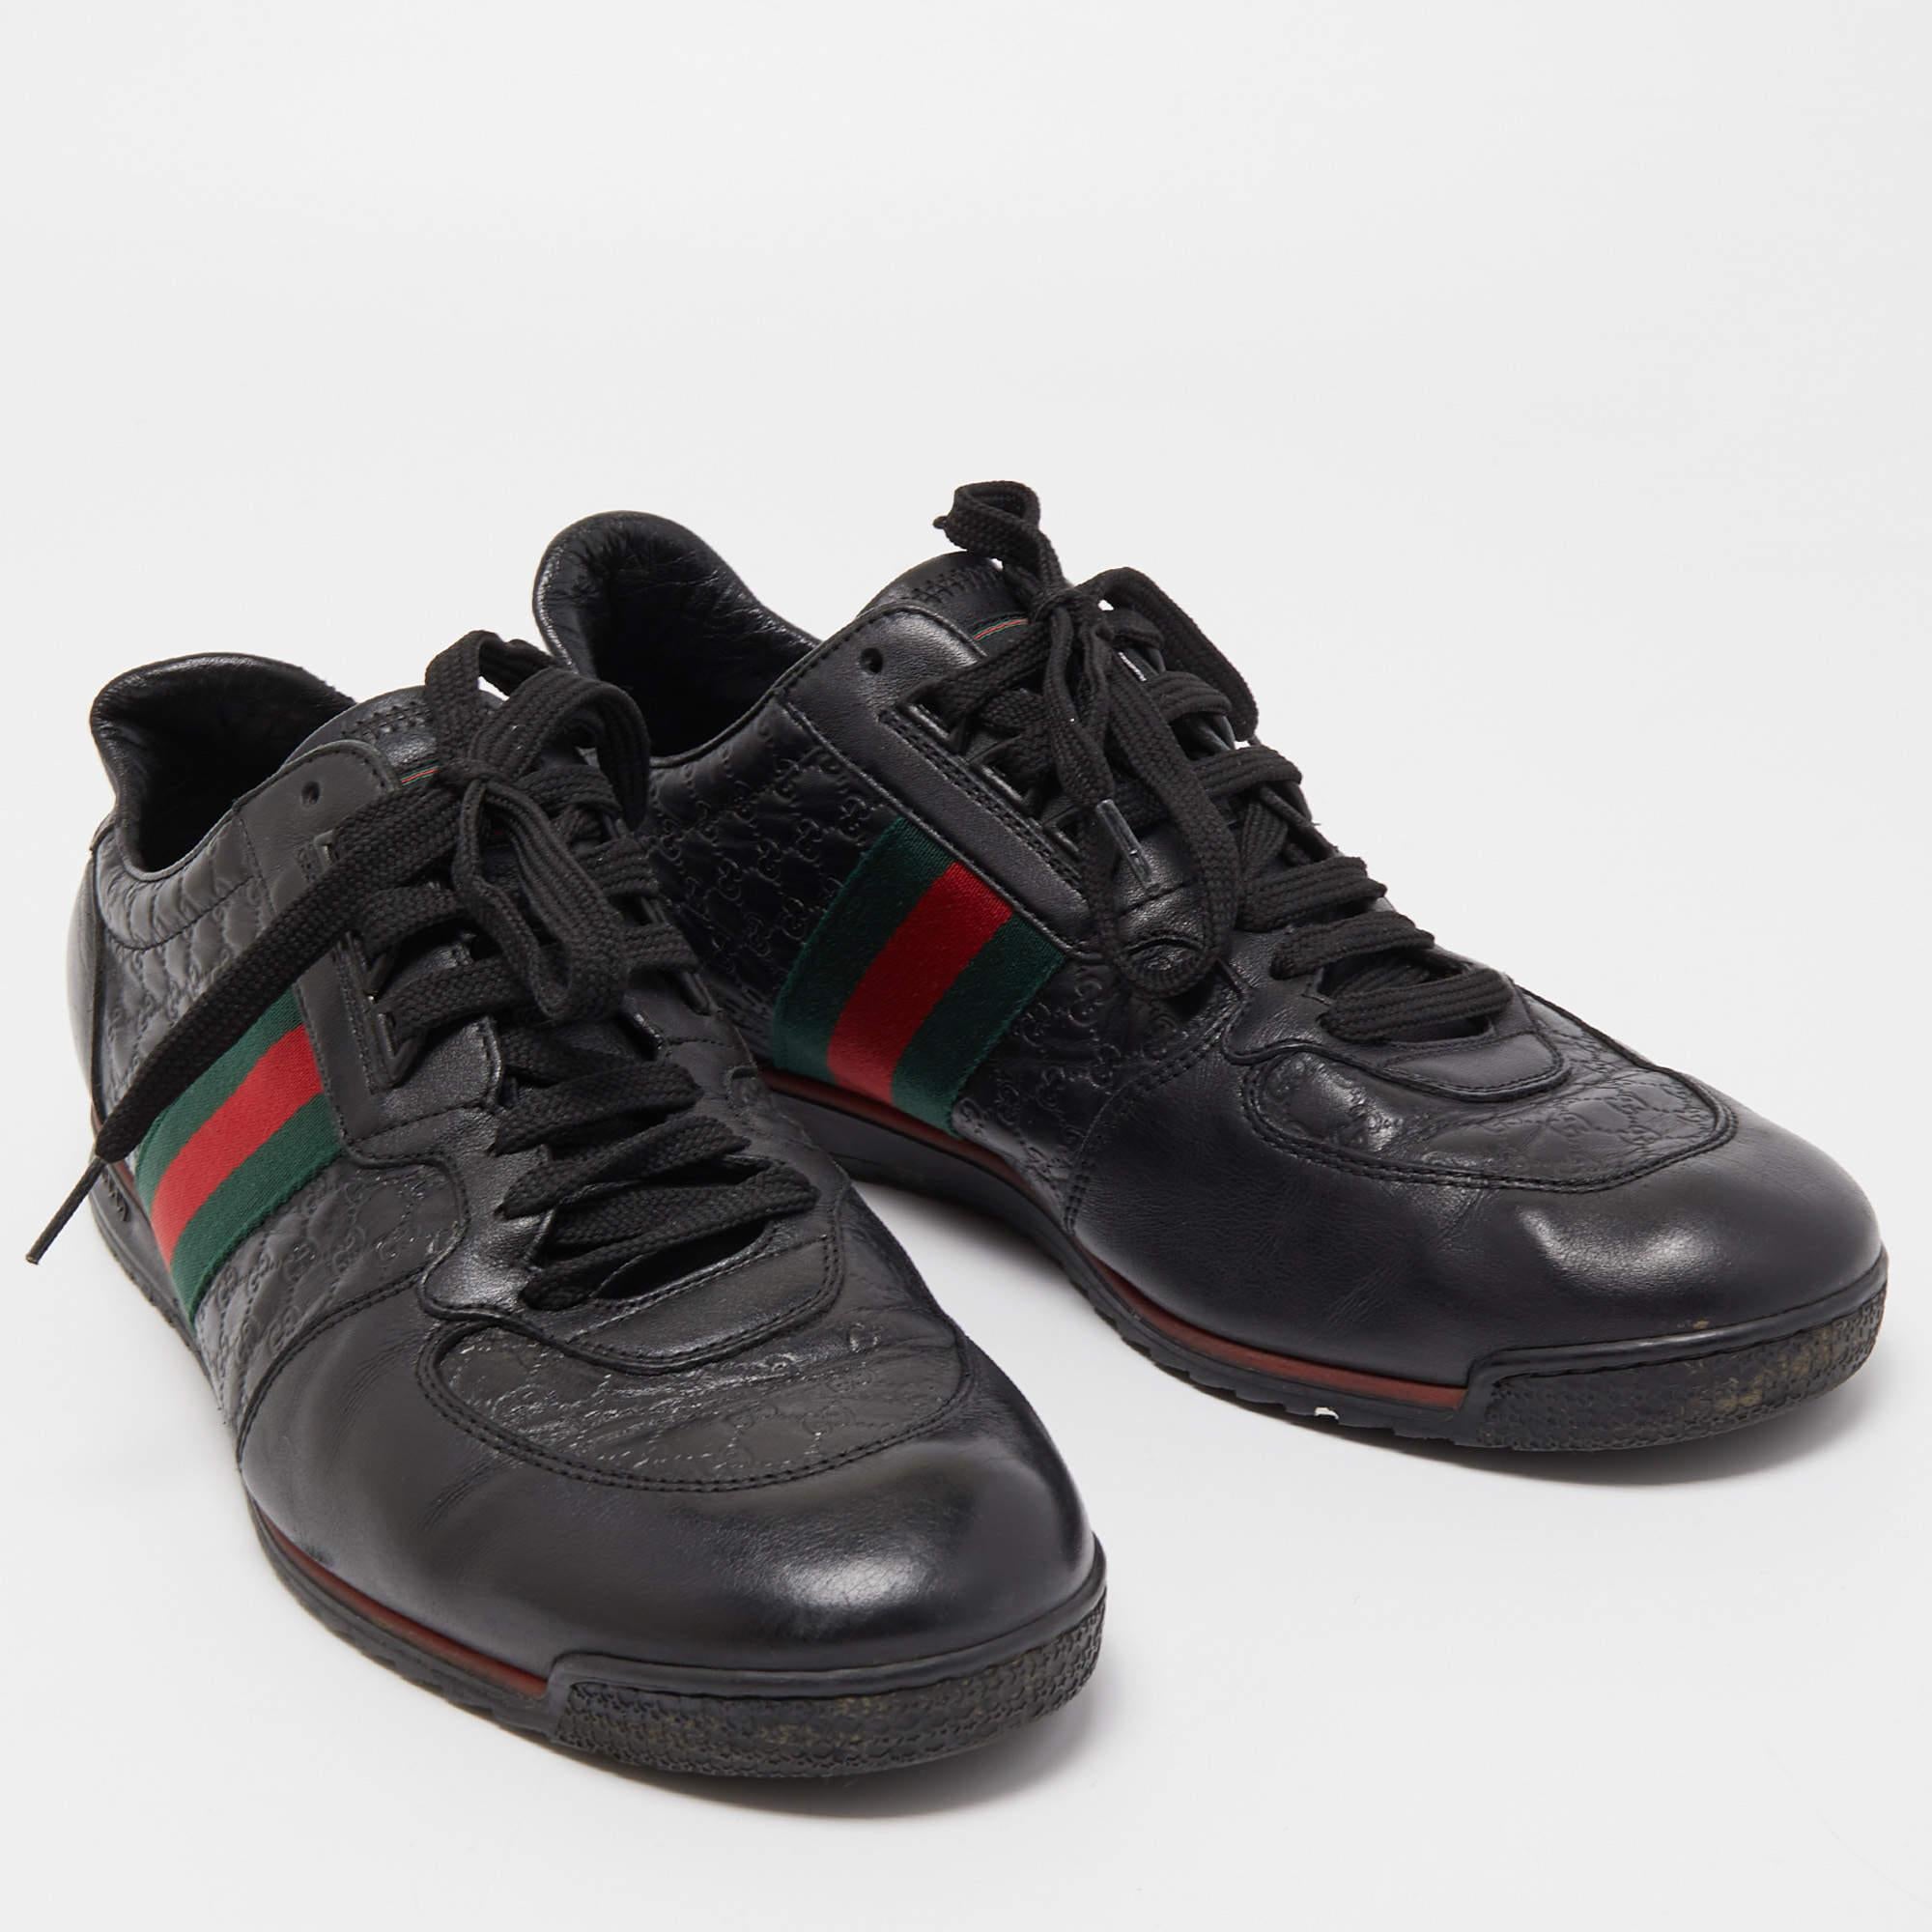 Gucci Black Guccissima Leather Web Low Top Sneakers Size 44 1